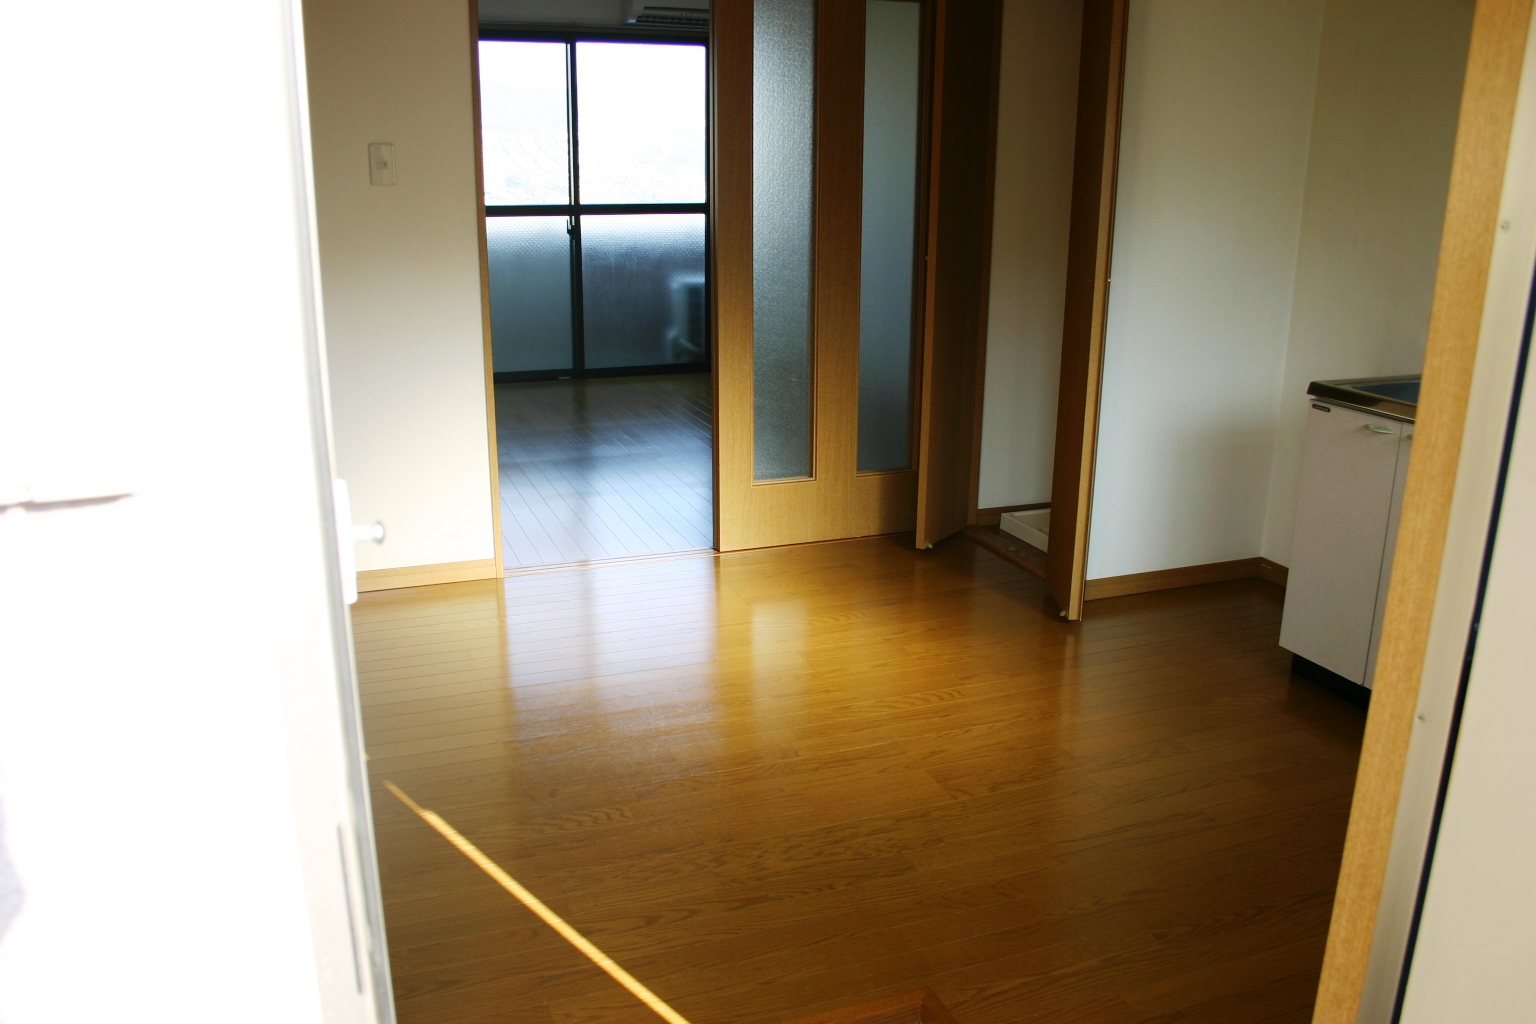 Living and room. Shiny flooring